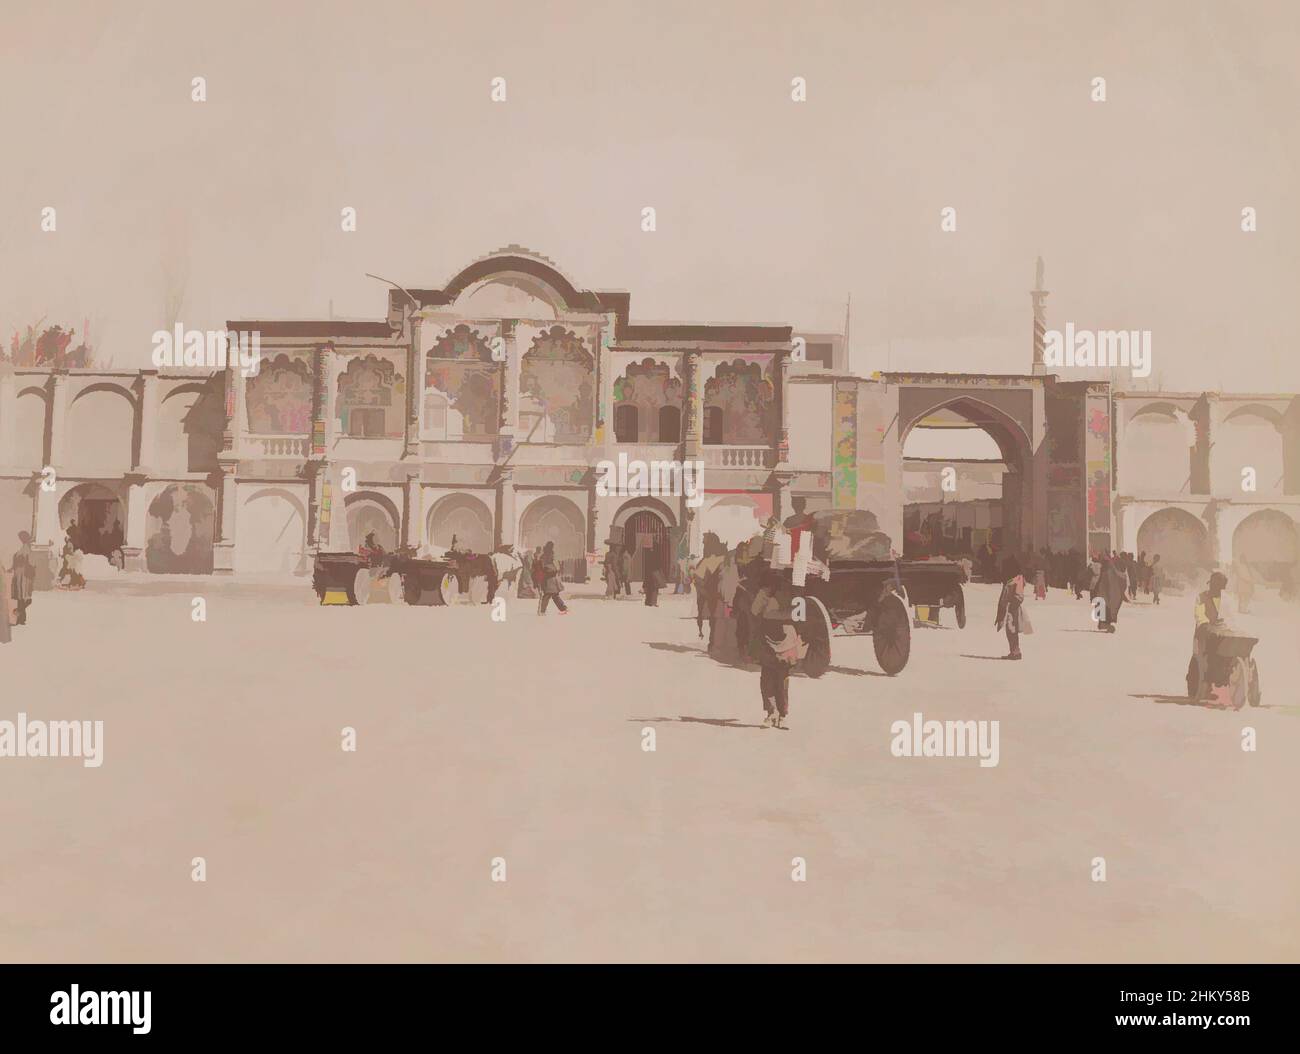 Art inspired by Royal Bank, building, Tehran, View of a beautifully decorated building in a square with people and carriages., Antoine Sevruguin, (attributed to), Iran, c. 1880 - c. 1910, paper, albumen print, height 147 mm, width 205 mm, Classic works modernized by Artotop with a splash of modernity. Shapes, color and value, eye-catching visual impact on art. Emotions through freedom of artworks in a contemporary way. A timeless message pursuing a wildly creative new direction. Artists turning to the digital medium and creating the Artotop NFT Stock Photo